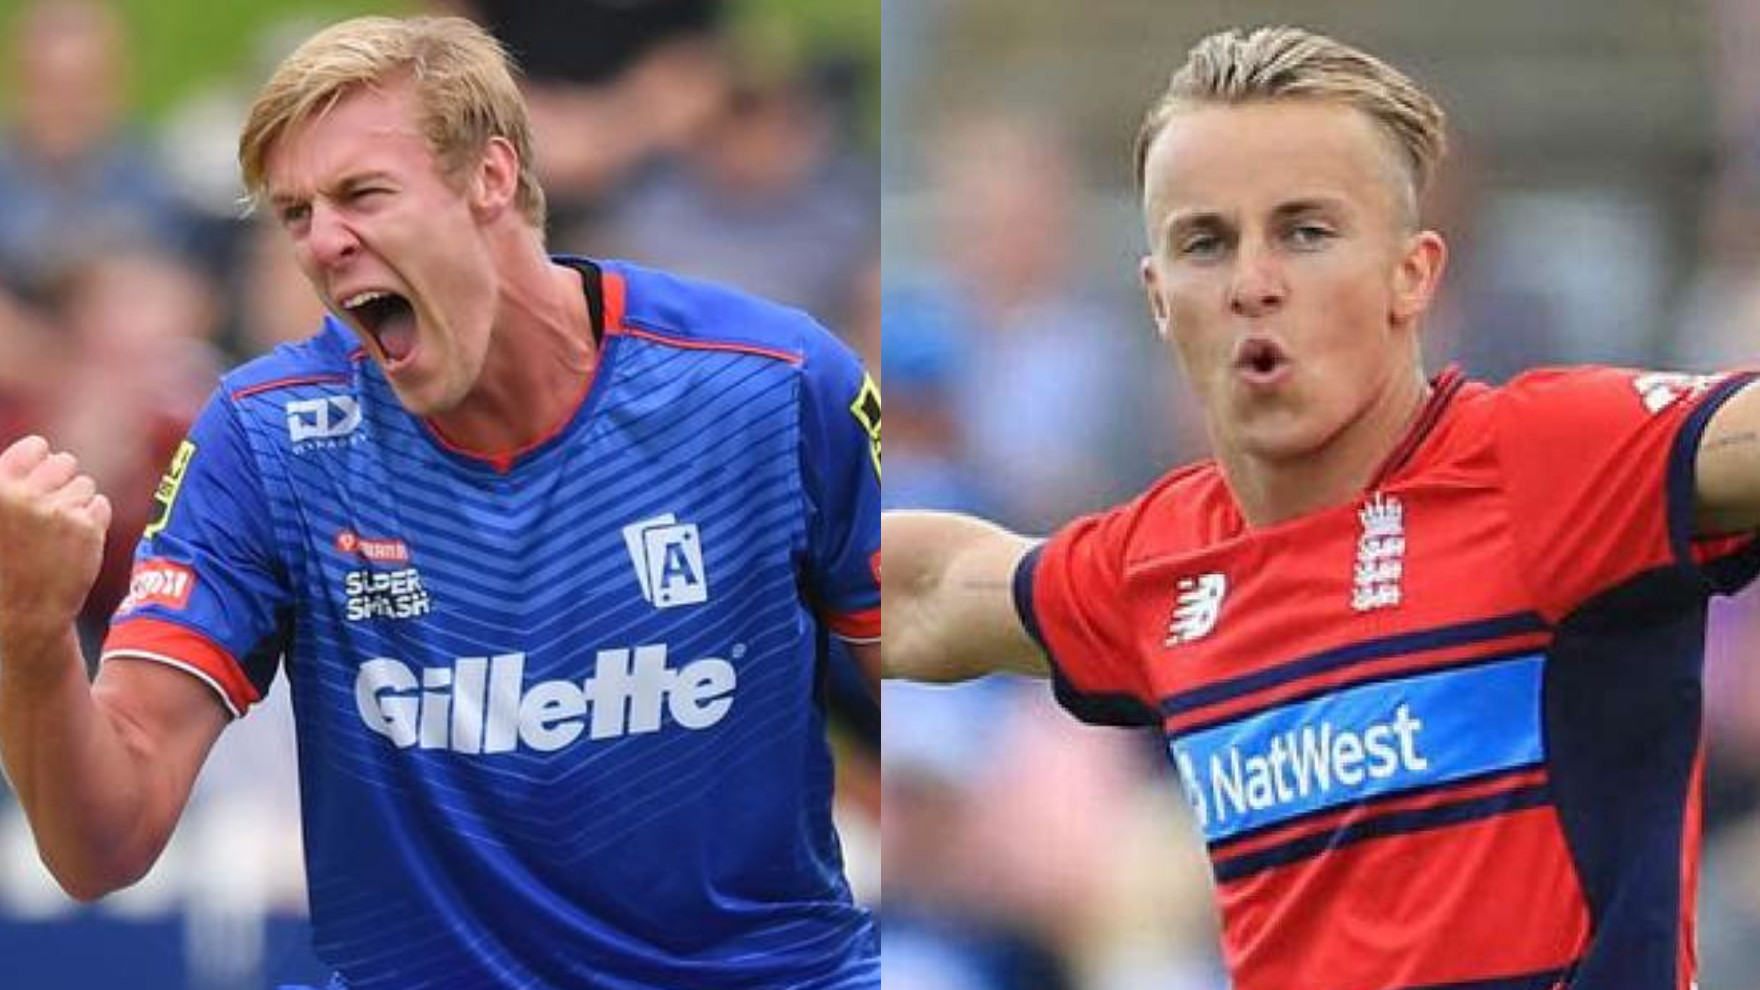 IPL 2021 Auction: Kyle Jamieson bought by RCB for 15 Cr; Tom Curran goes to DC for 5.25 Cr